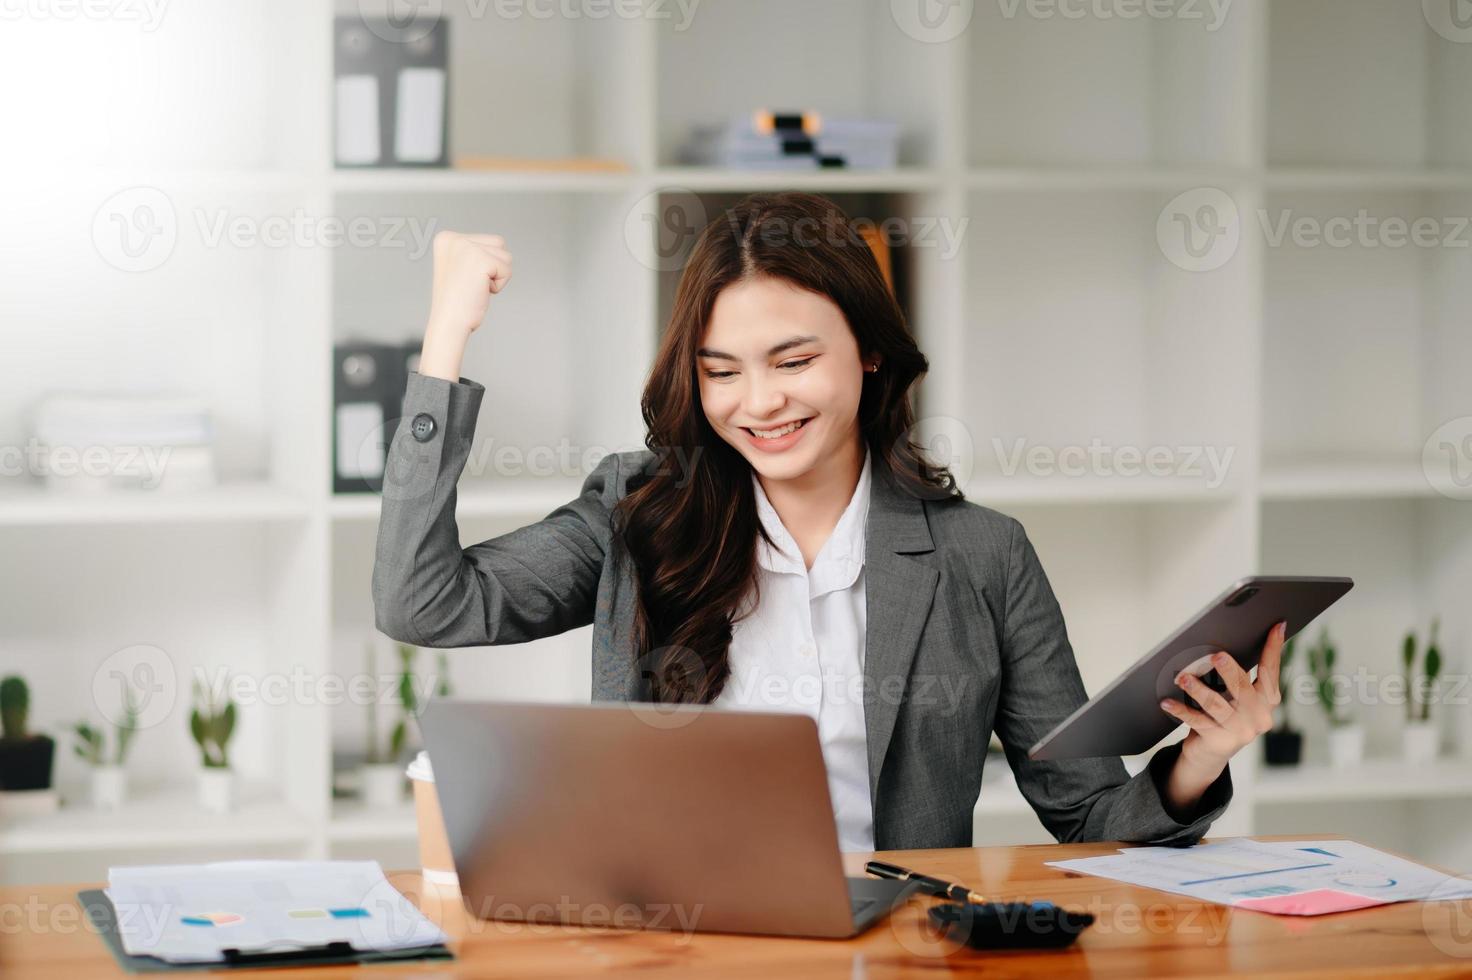 usiness woman are delighted and happy with the work they do on their tablet, laptop and taking notes at the modern office. photo